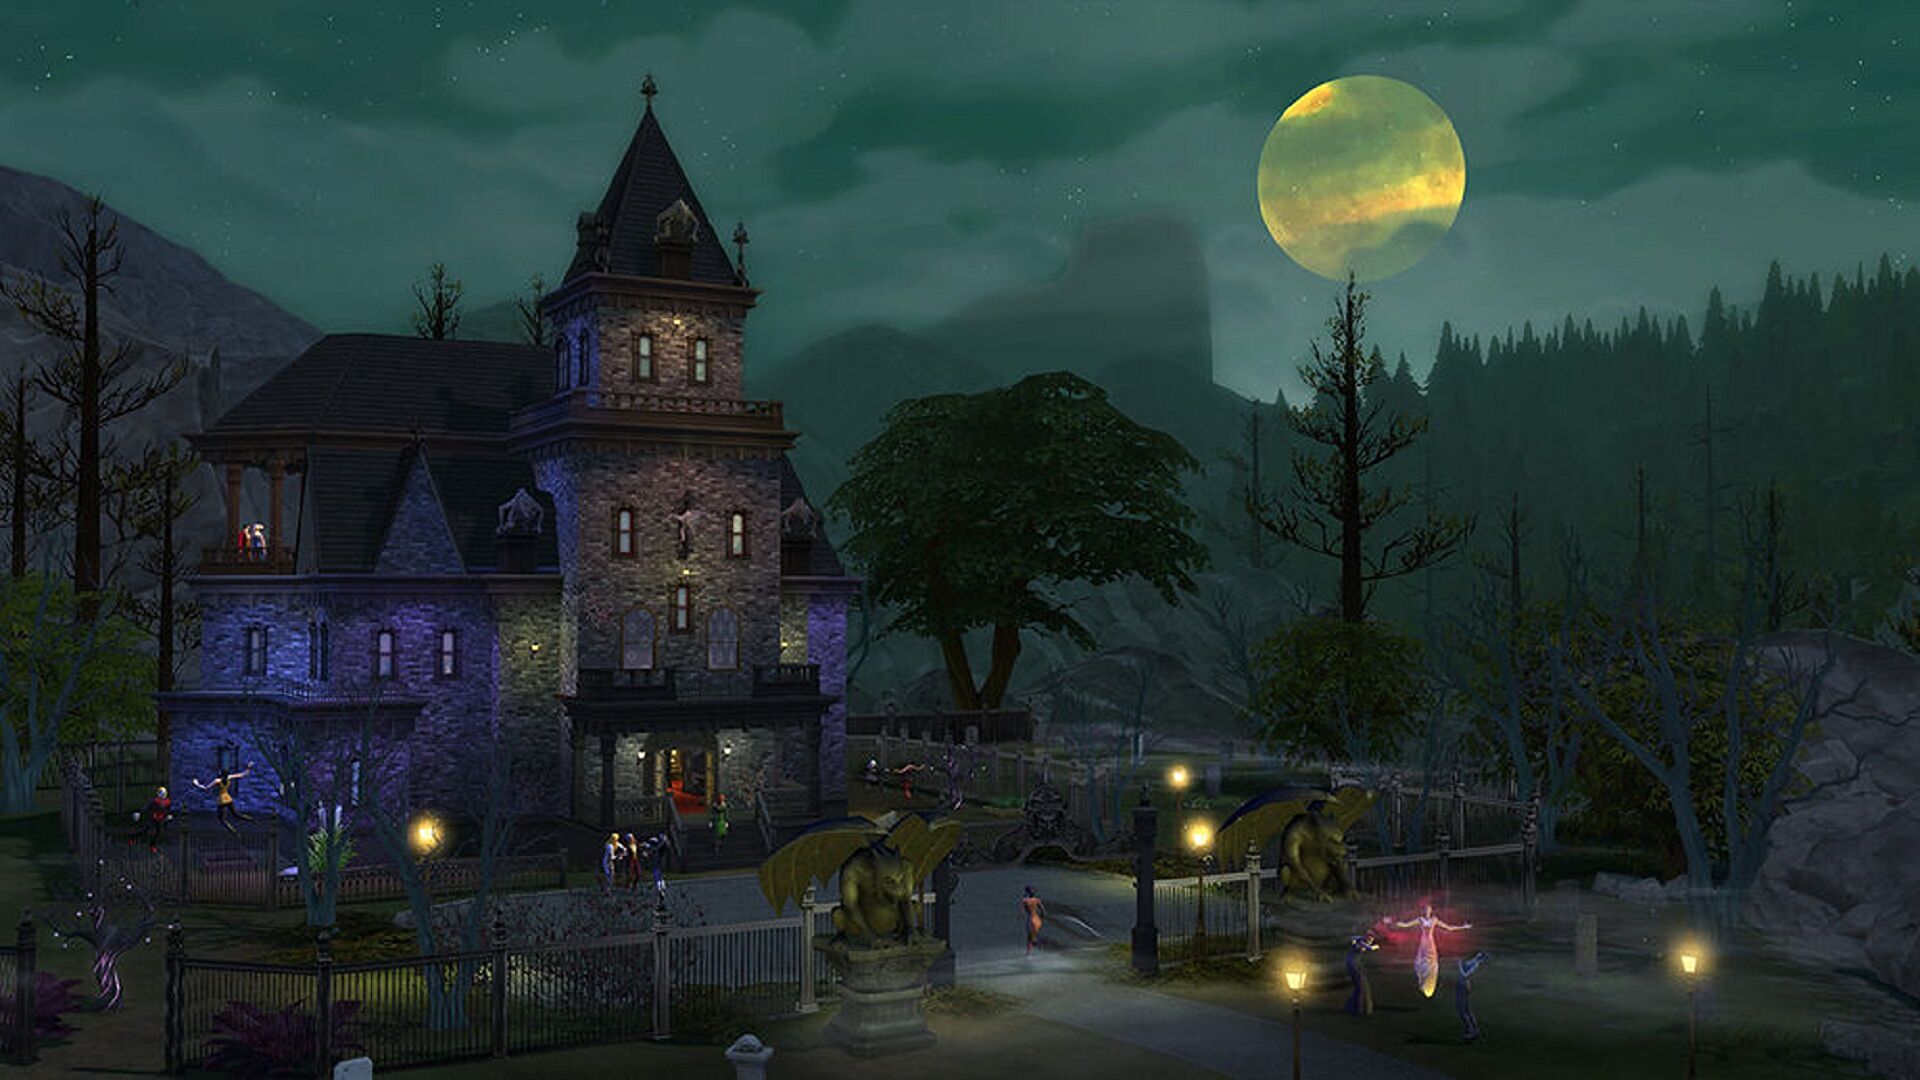 The Sims 4 teases next kits and game pack, including werewolves